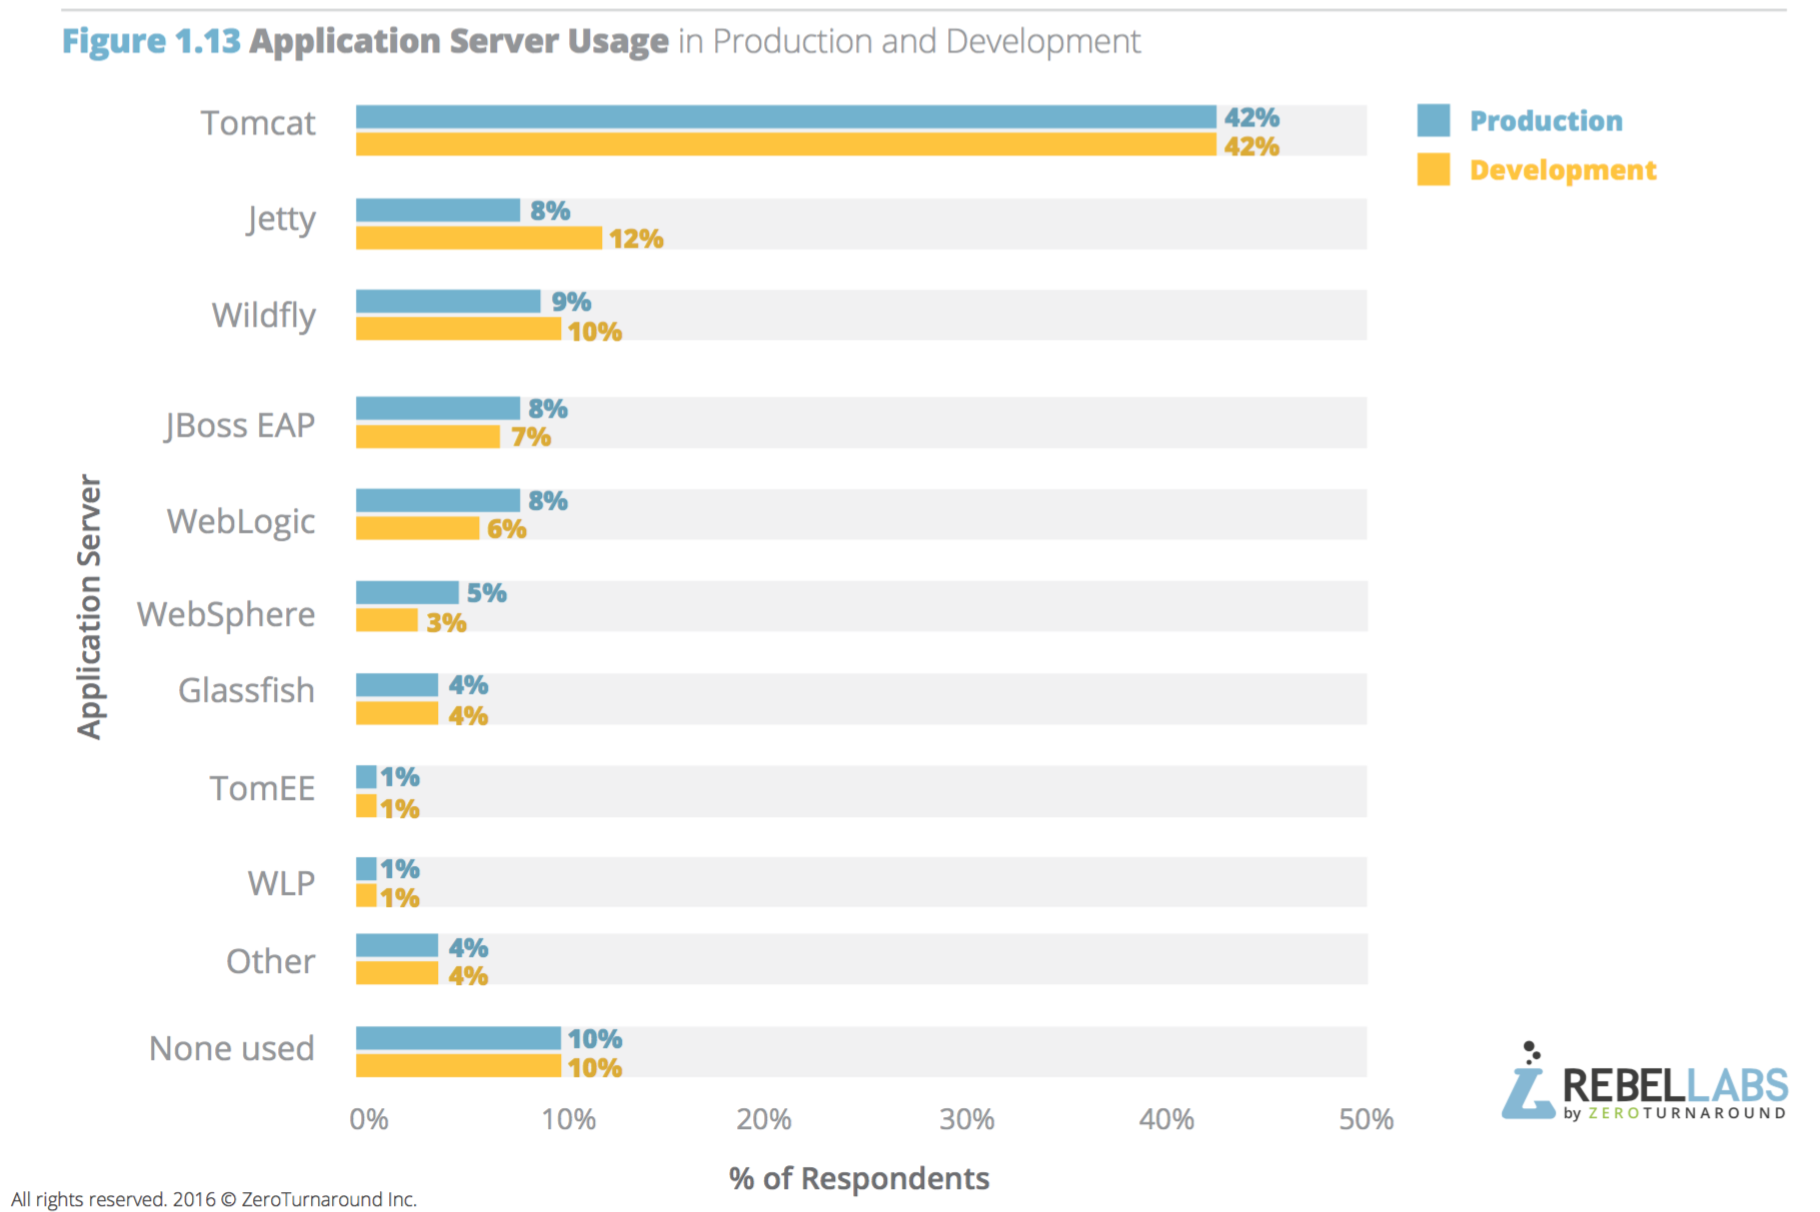 bar graph showing application server usage in production and development